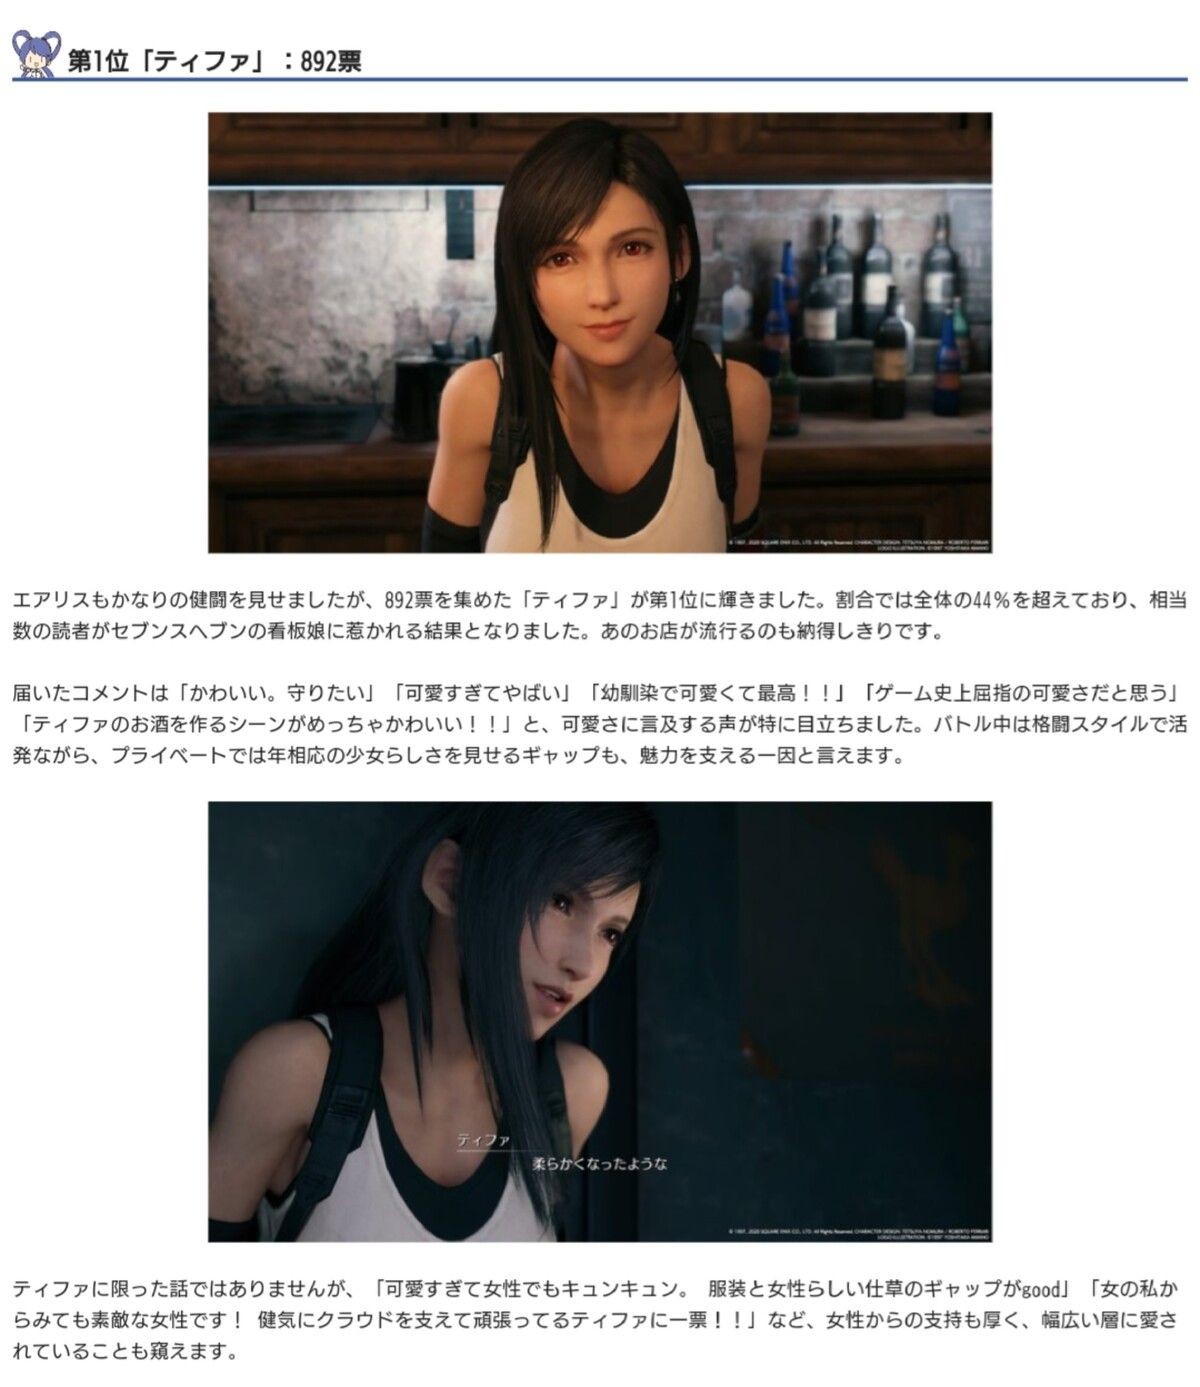 Self 【Good News】 FF7's Tifa,hero And Alice Win The Popular Vote With The First Place Wwwwww Cuminmouth